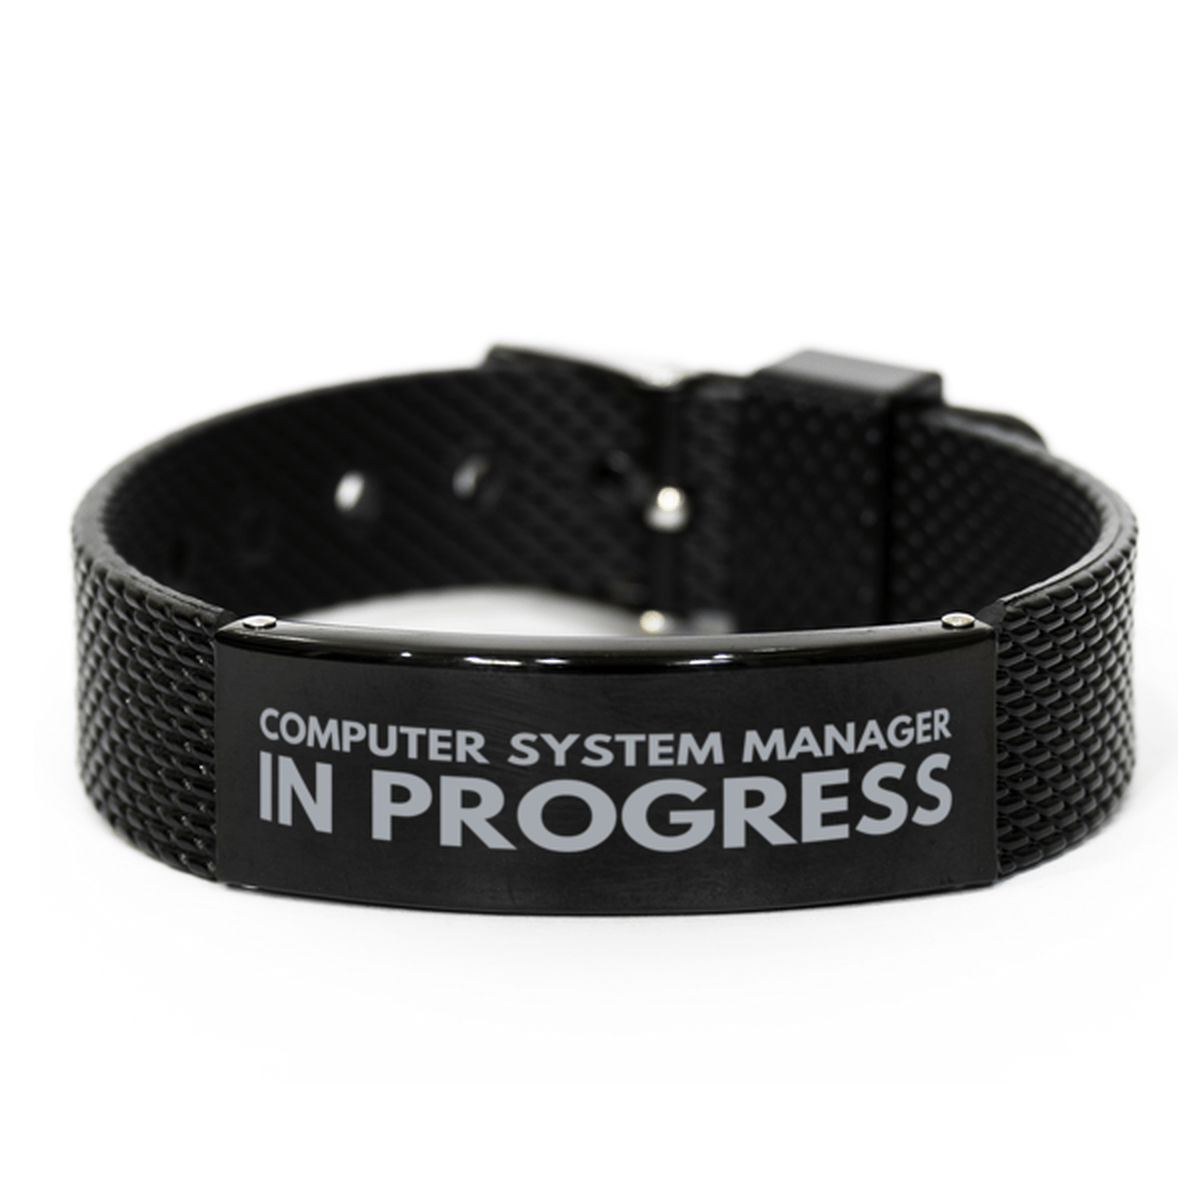 Inspirational Computer System Manager Black Shark Mesh Bracelet, Computer System Manager In Progress, Best Graduation Gifts for Students